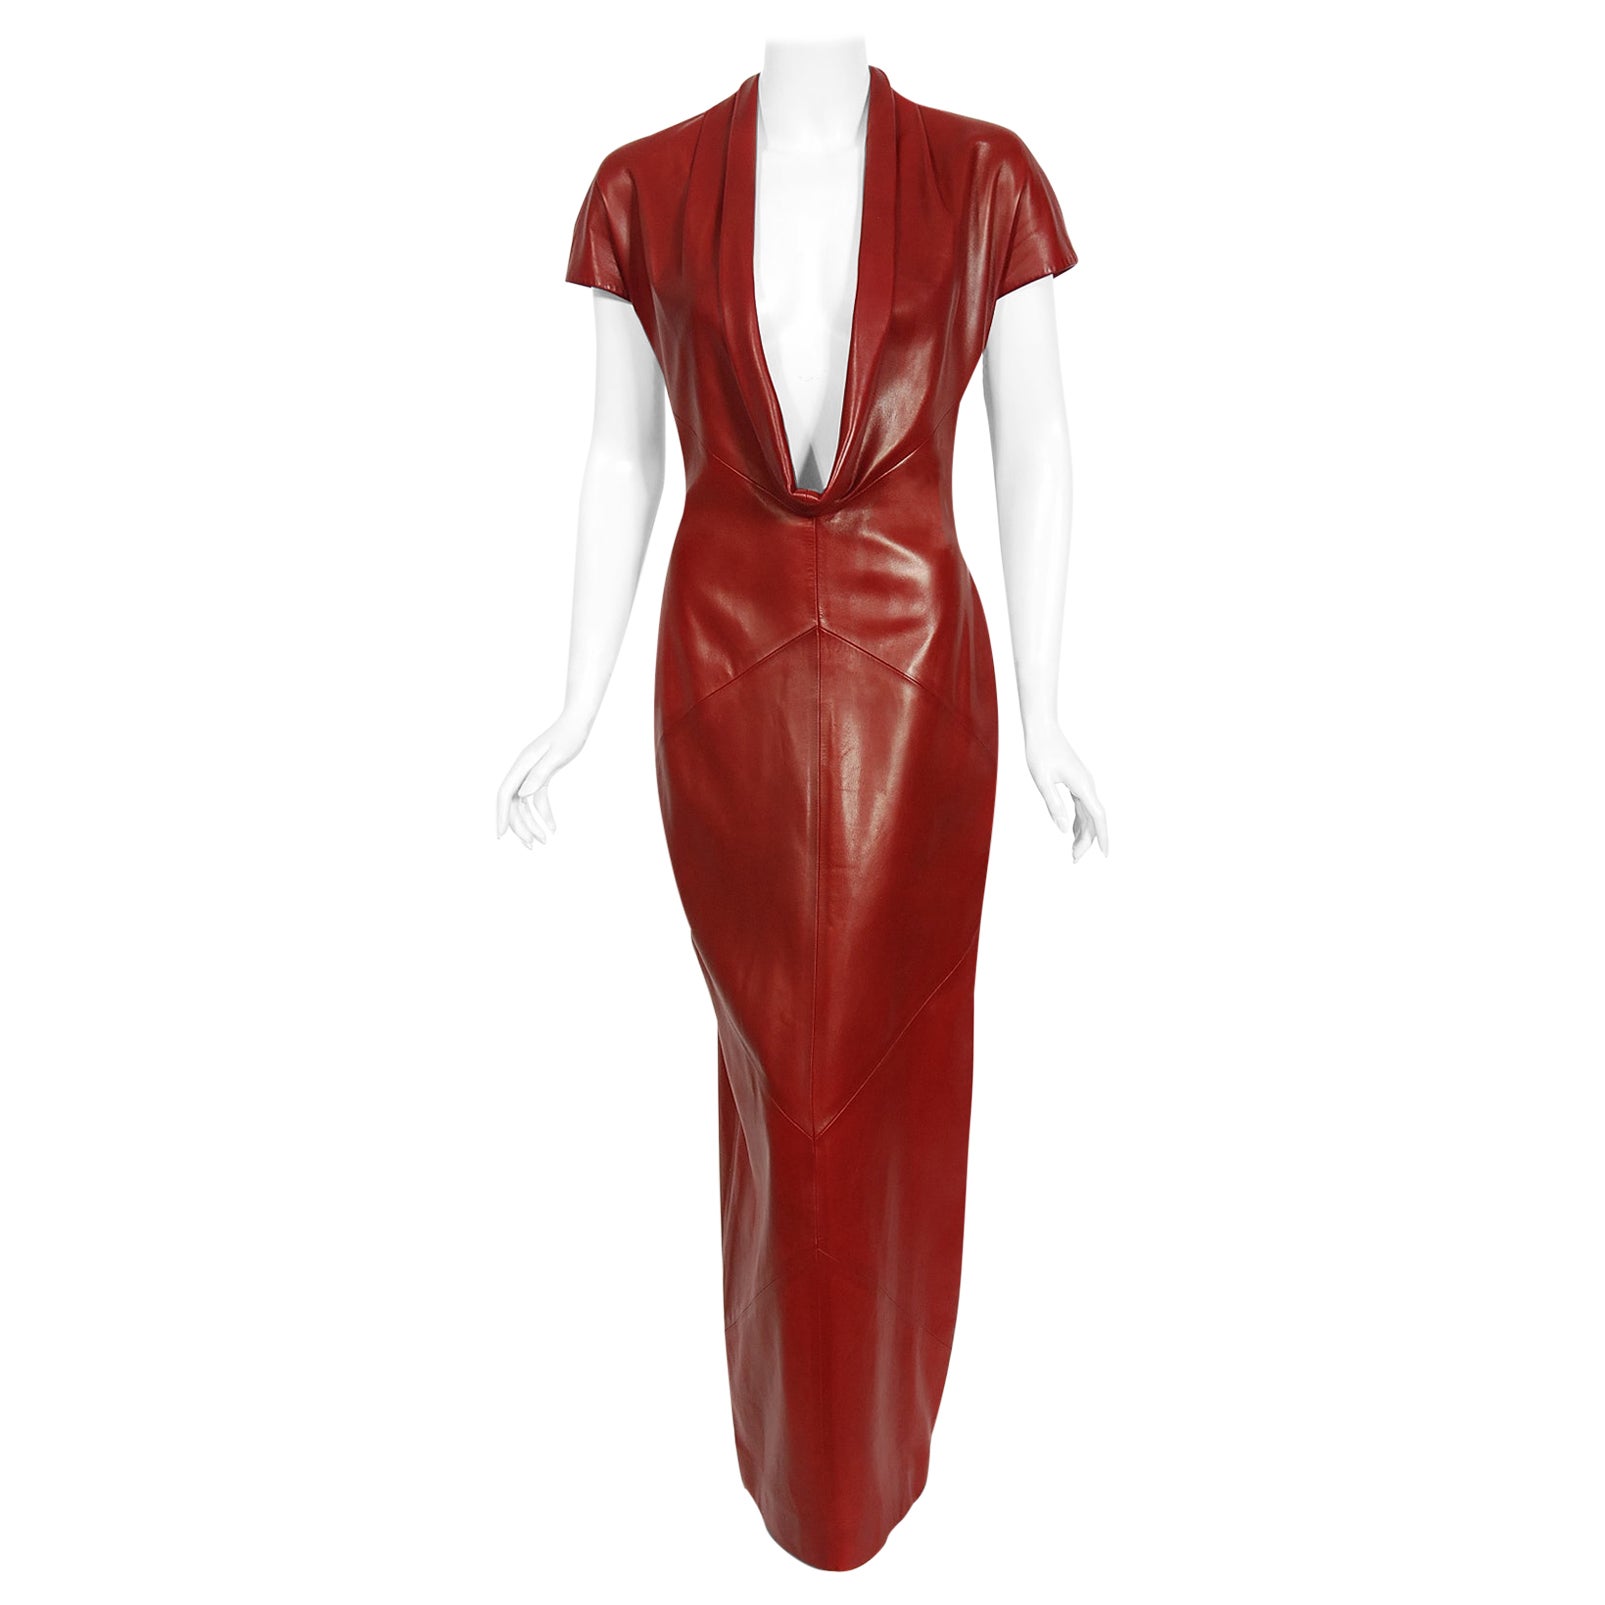 Vintage 1998 Alexander McQueen For Givenchy Runway Red Leather Low-Plunge Gown 